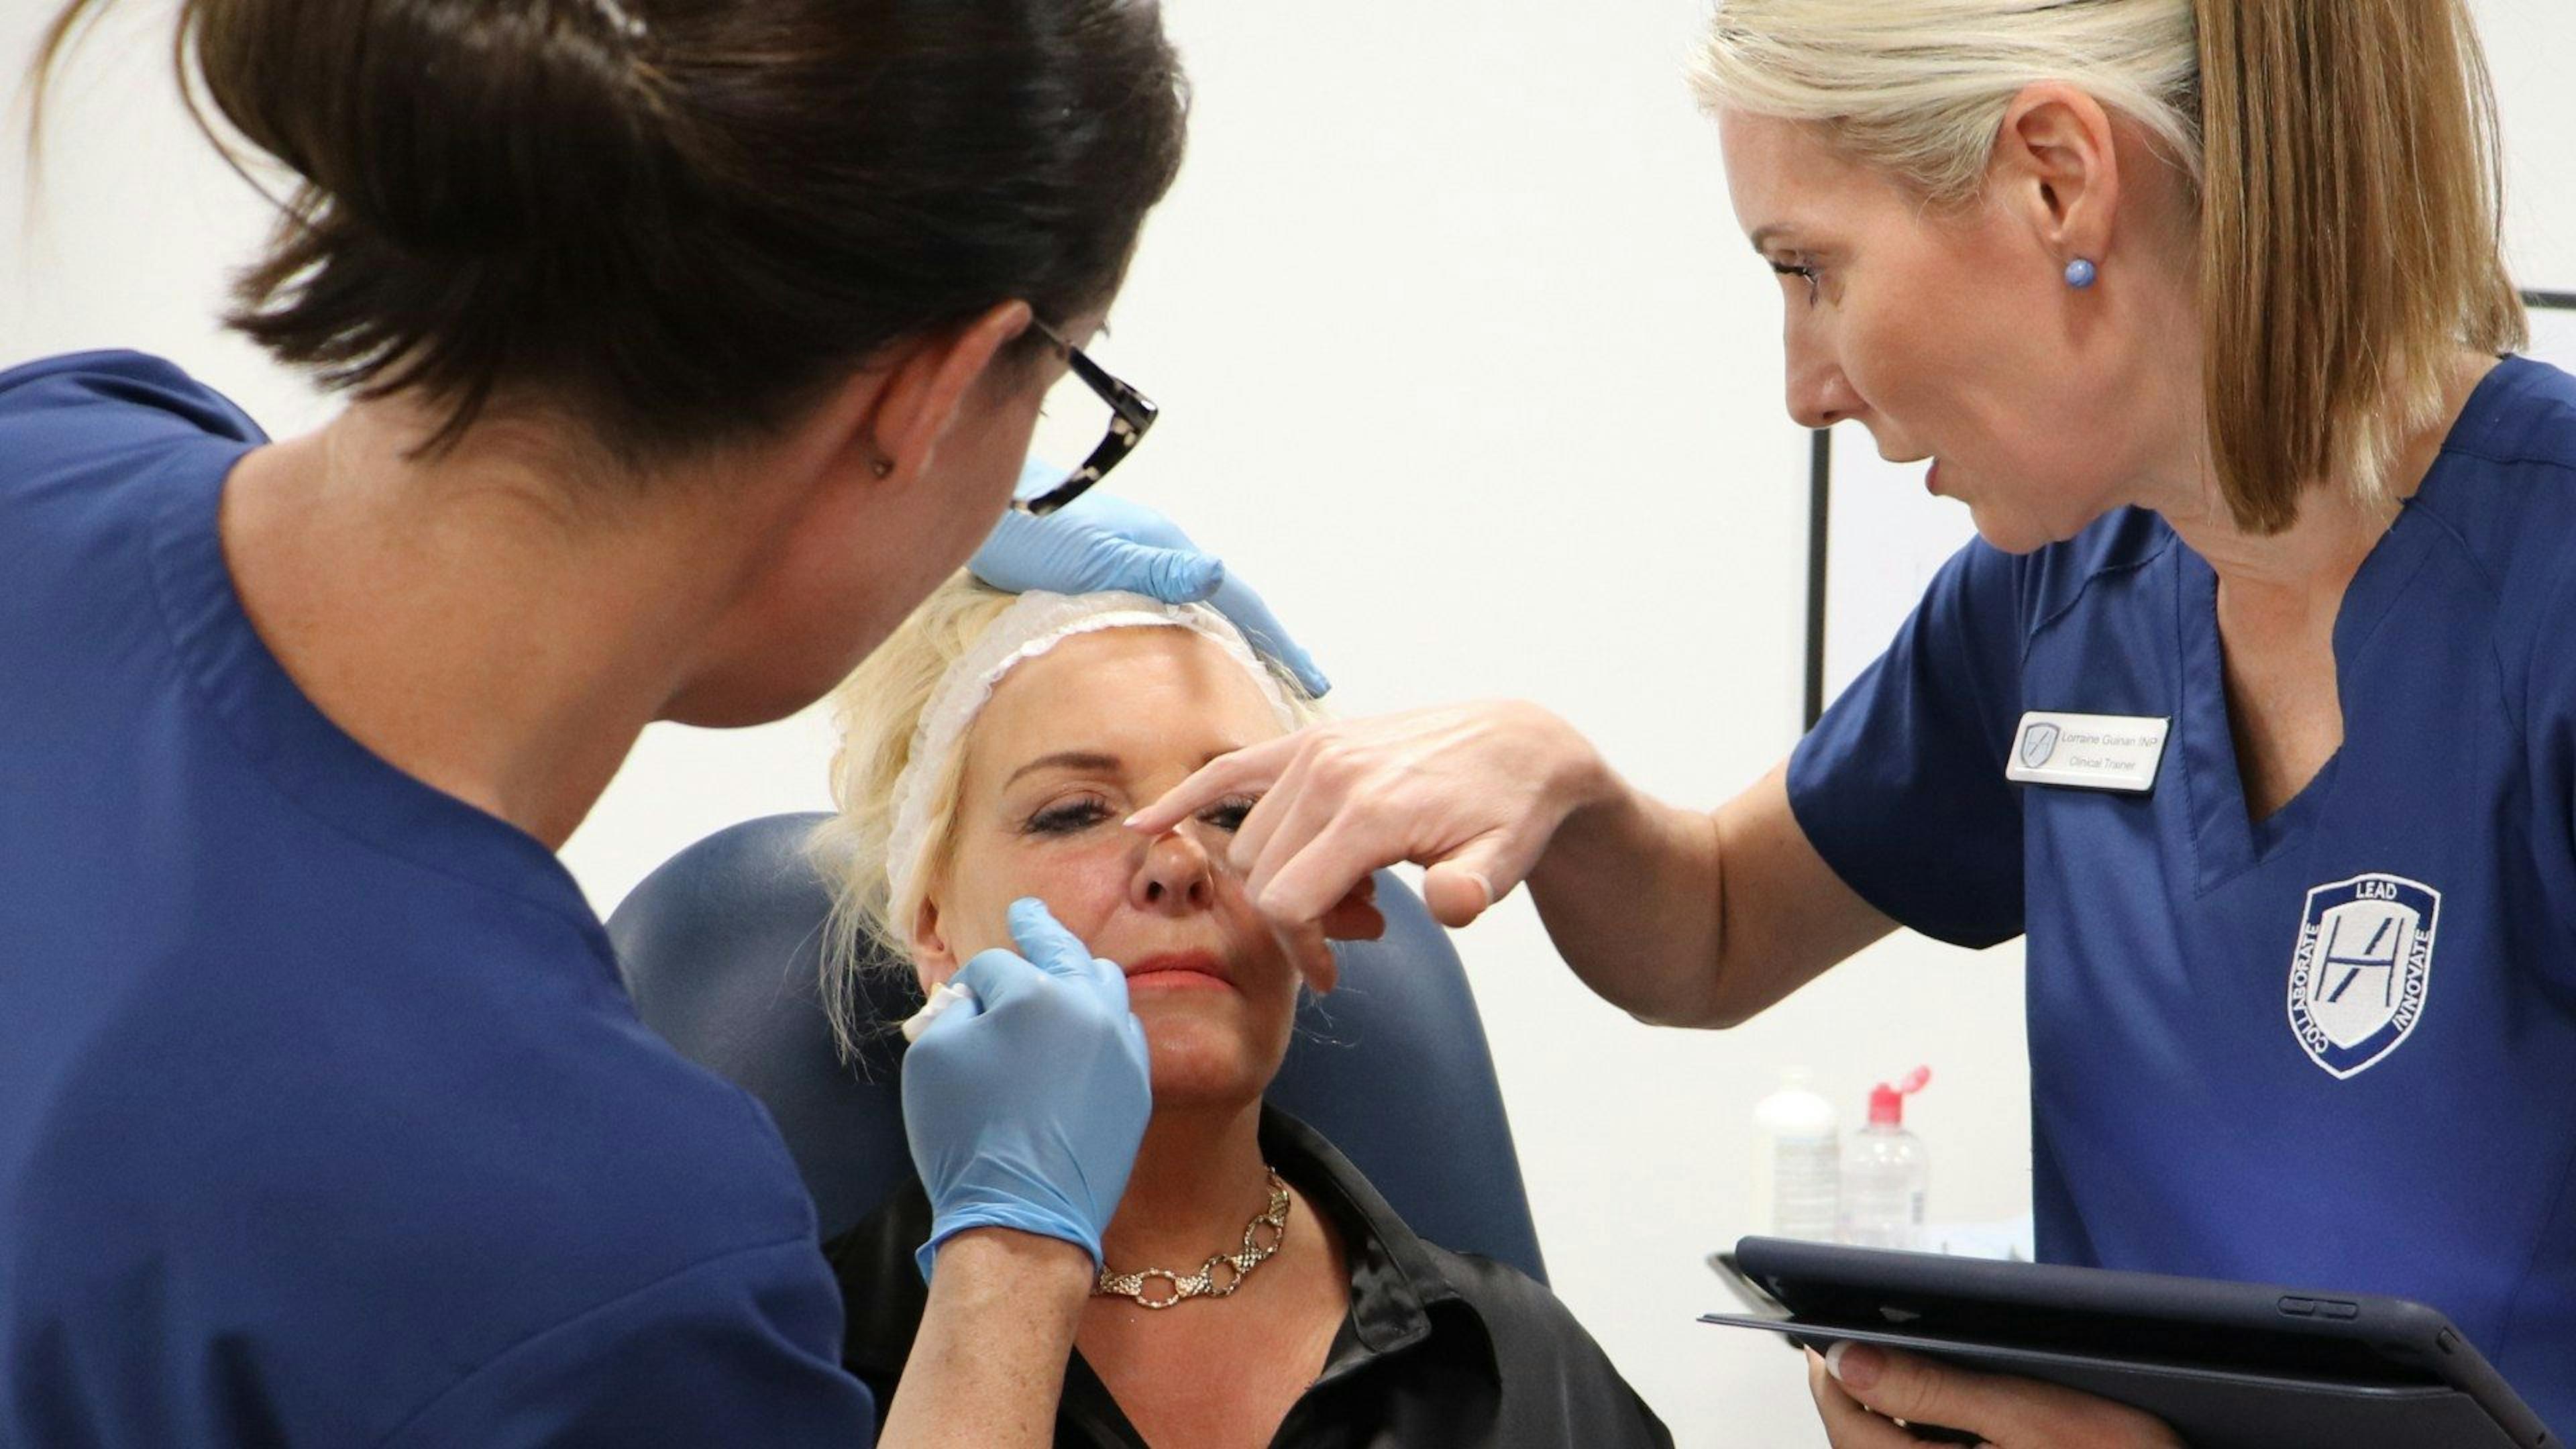 MEDICAL AESTHETICS TRAINING PRACTICAL ONE TO ONE MENTORING LEVEL 7 DIPLOMA BOTOX FILLERS HARLEY ACADEMY FACIAL ASSESSMENT